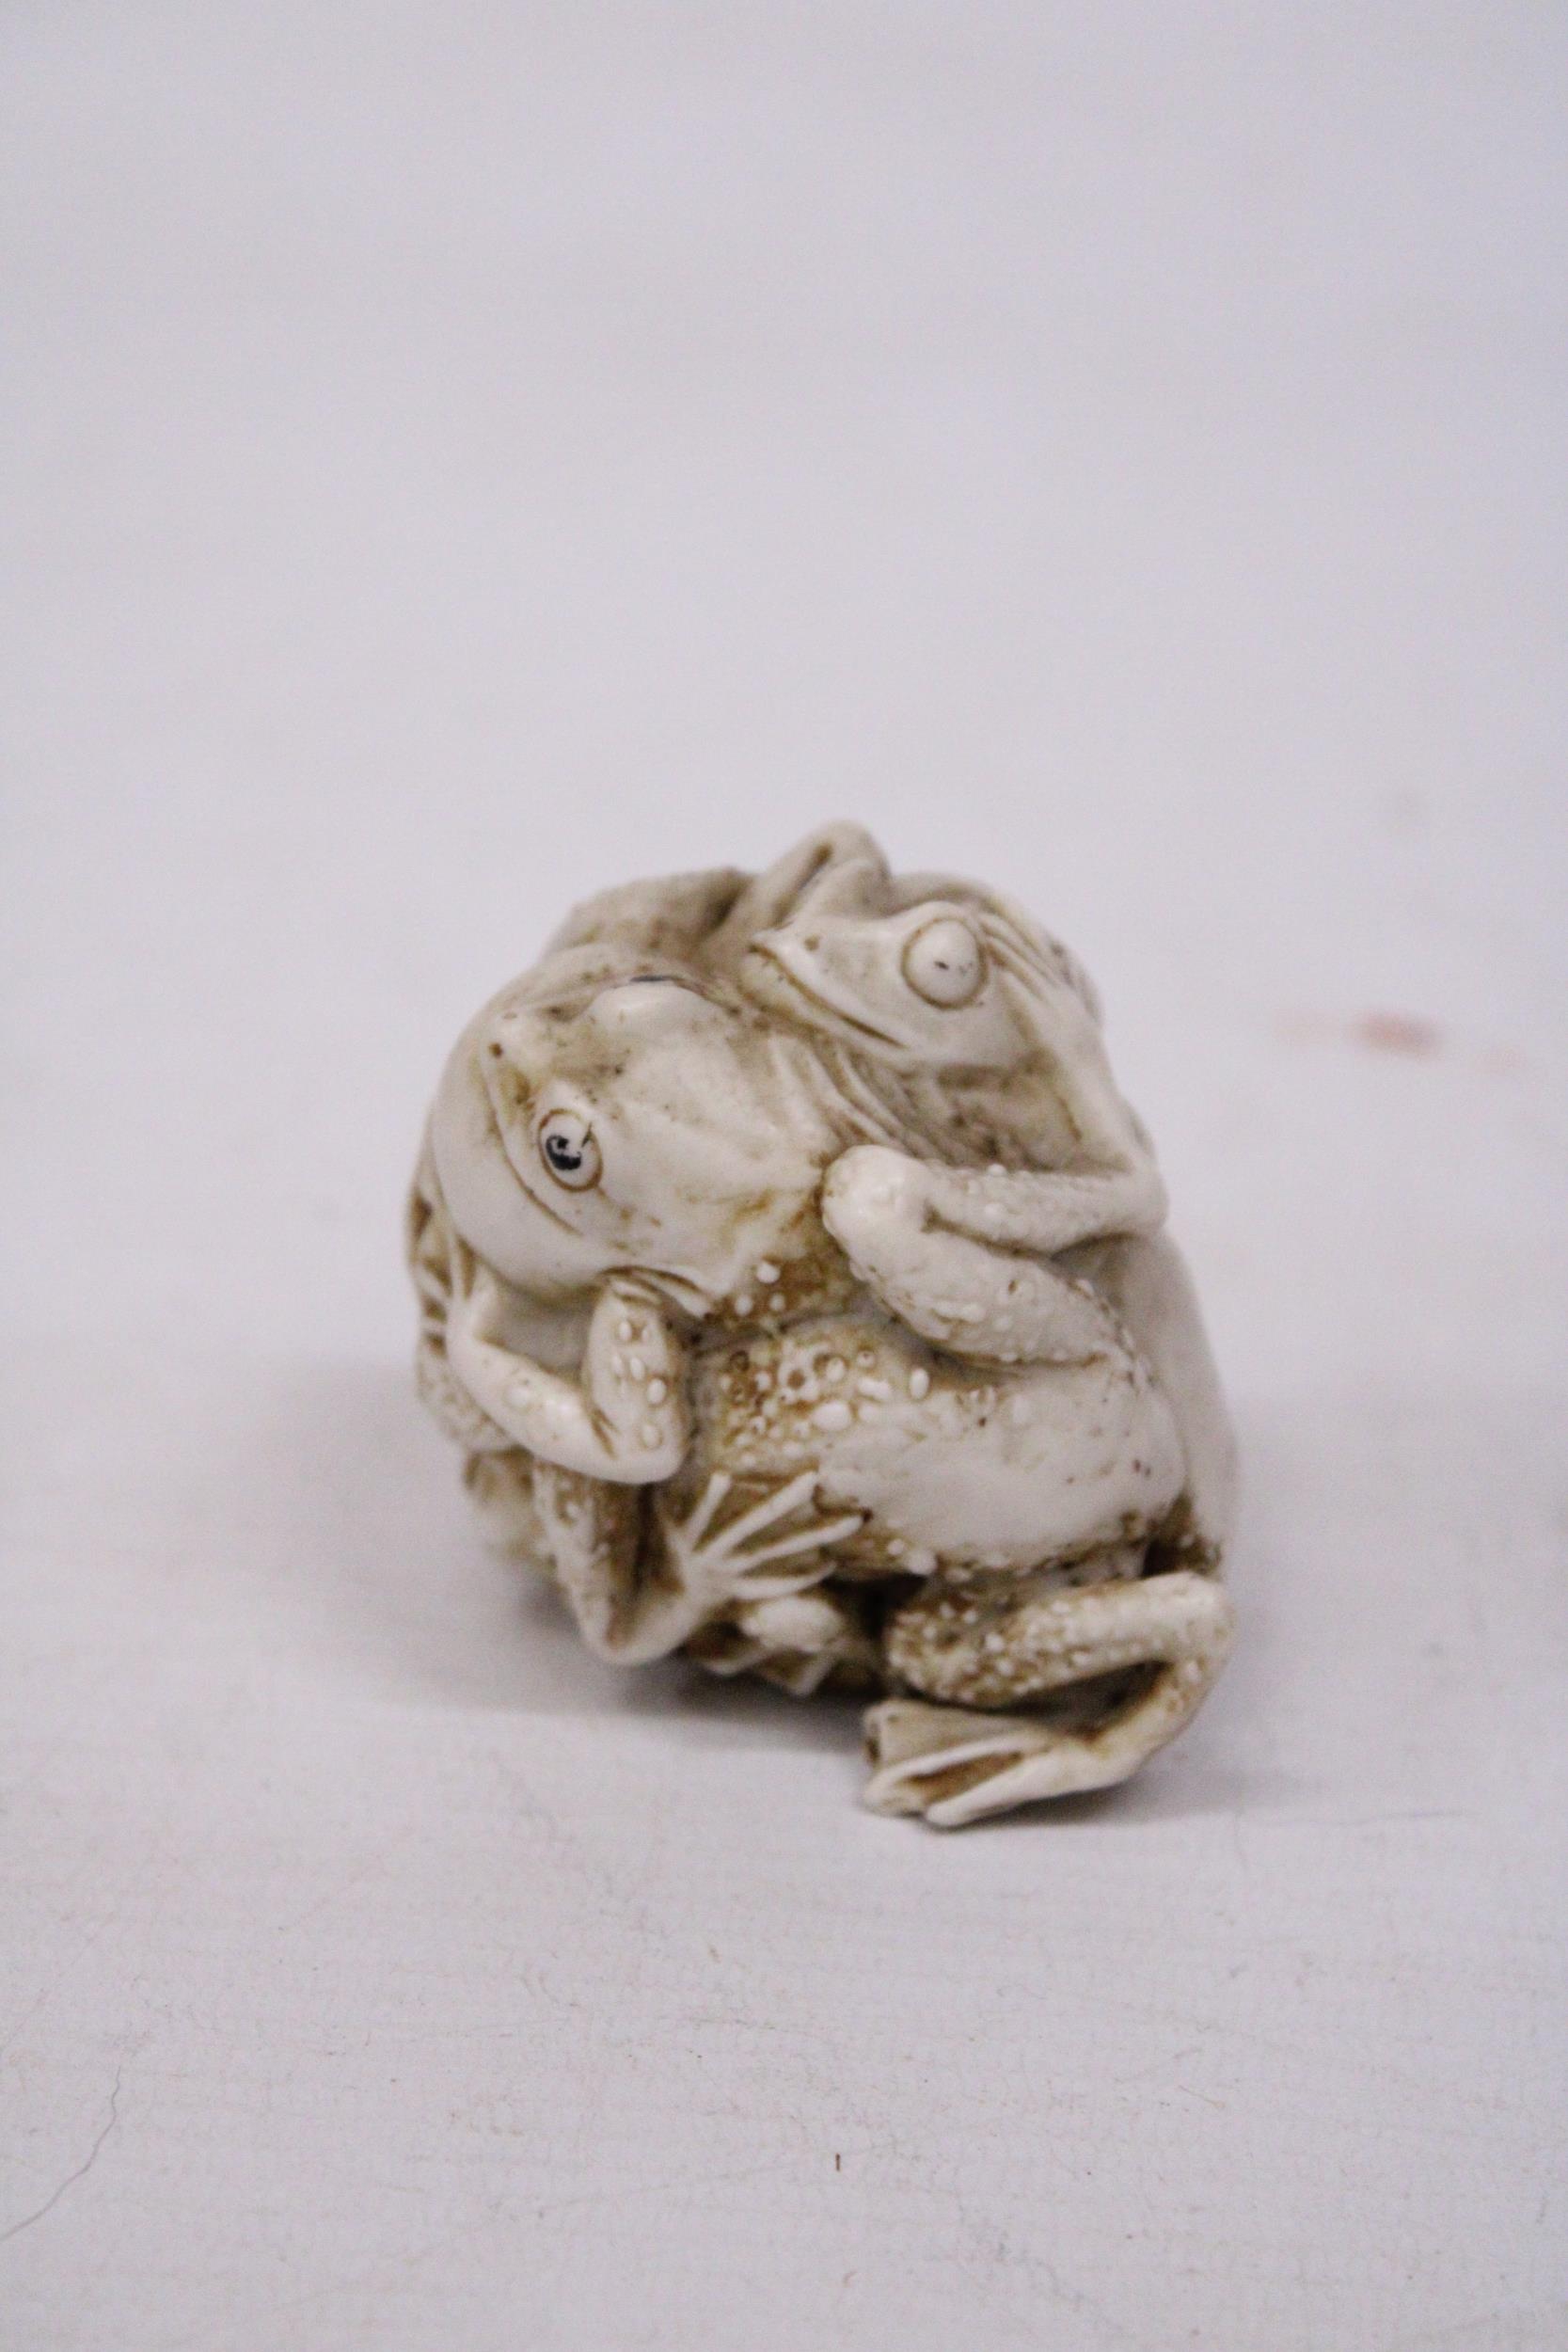 A HAND CARVED ORIENTAL FROG ORNAMENT - Image 4 of 6